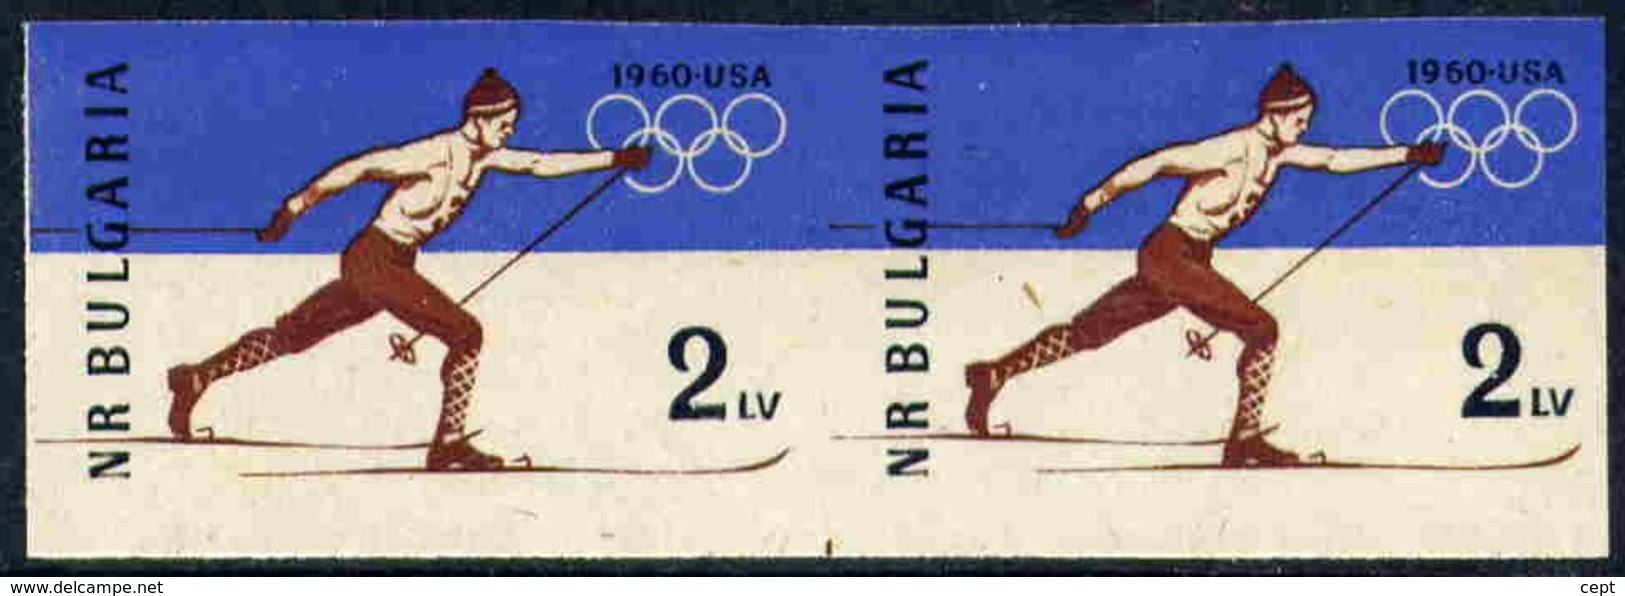 Ski-running - Bulgaria / Bulgarie 1960 - 2 Stamps  Imperforate MNH** - Inverno1960: Squaw Valley